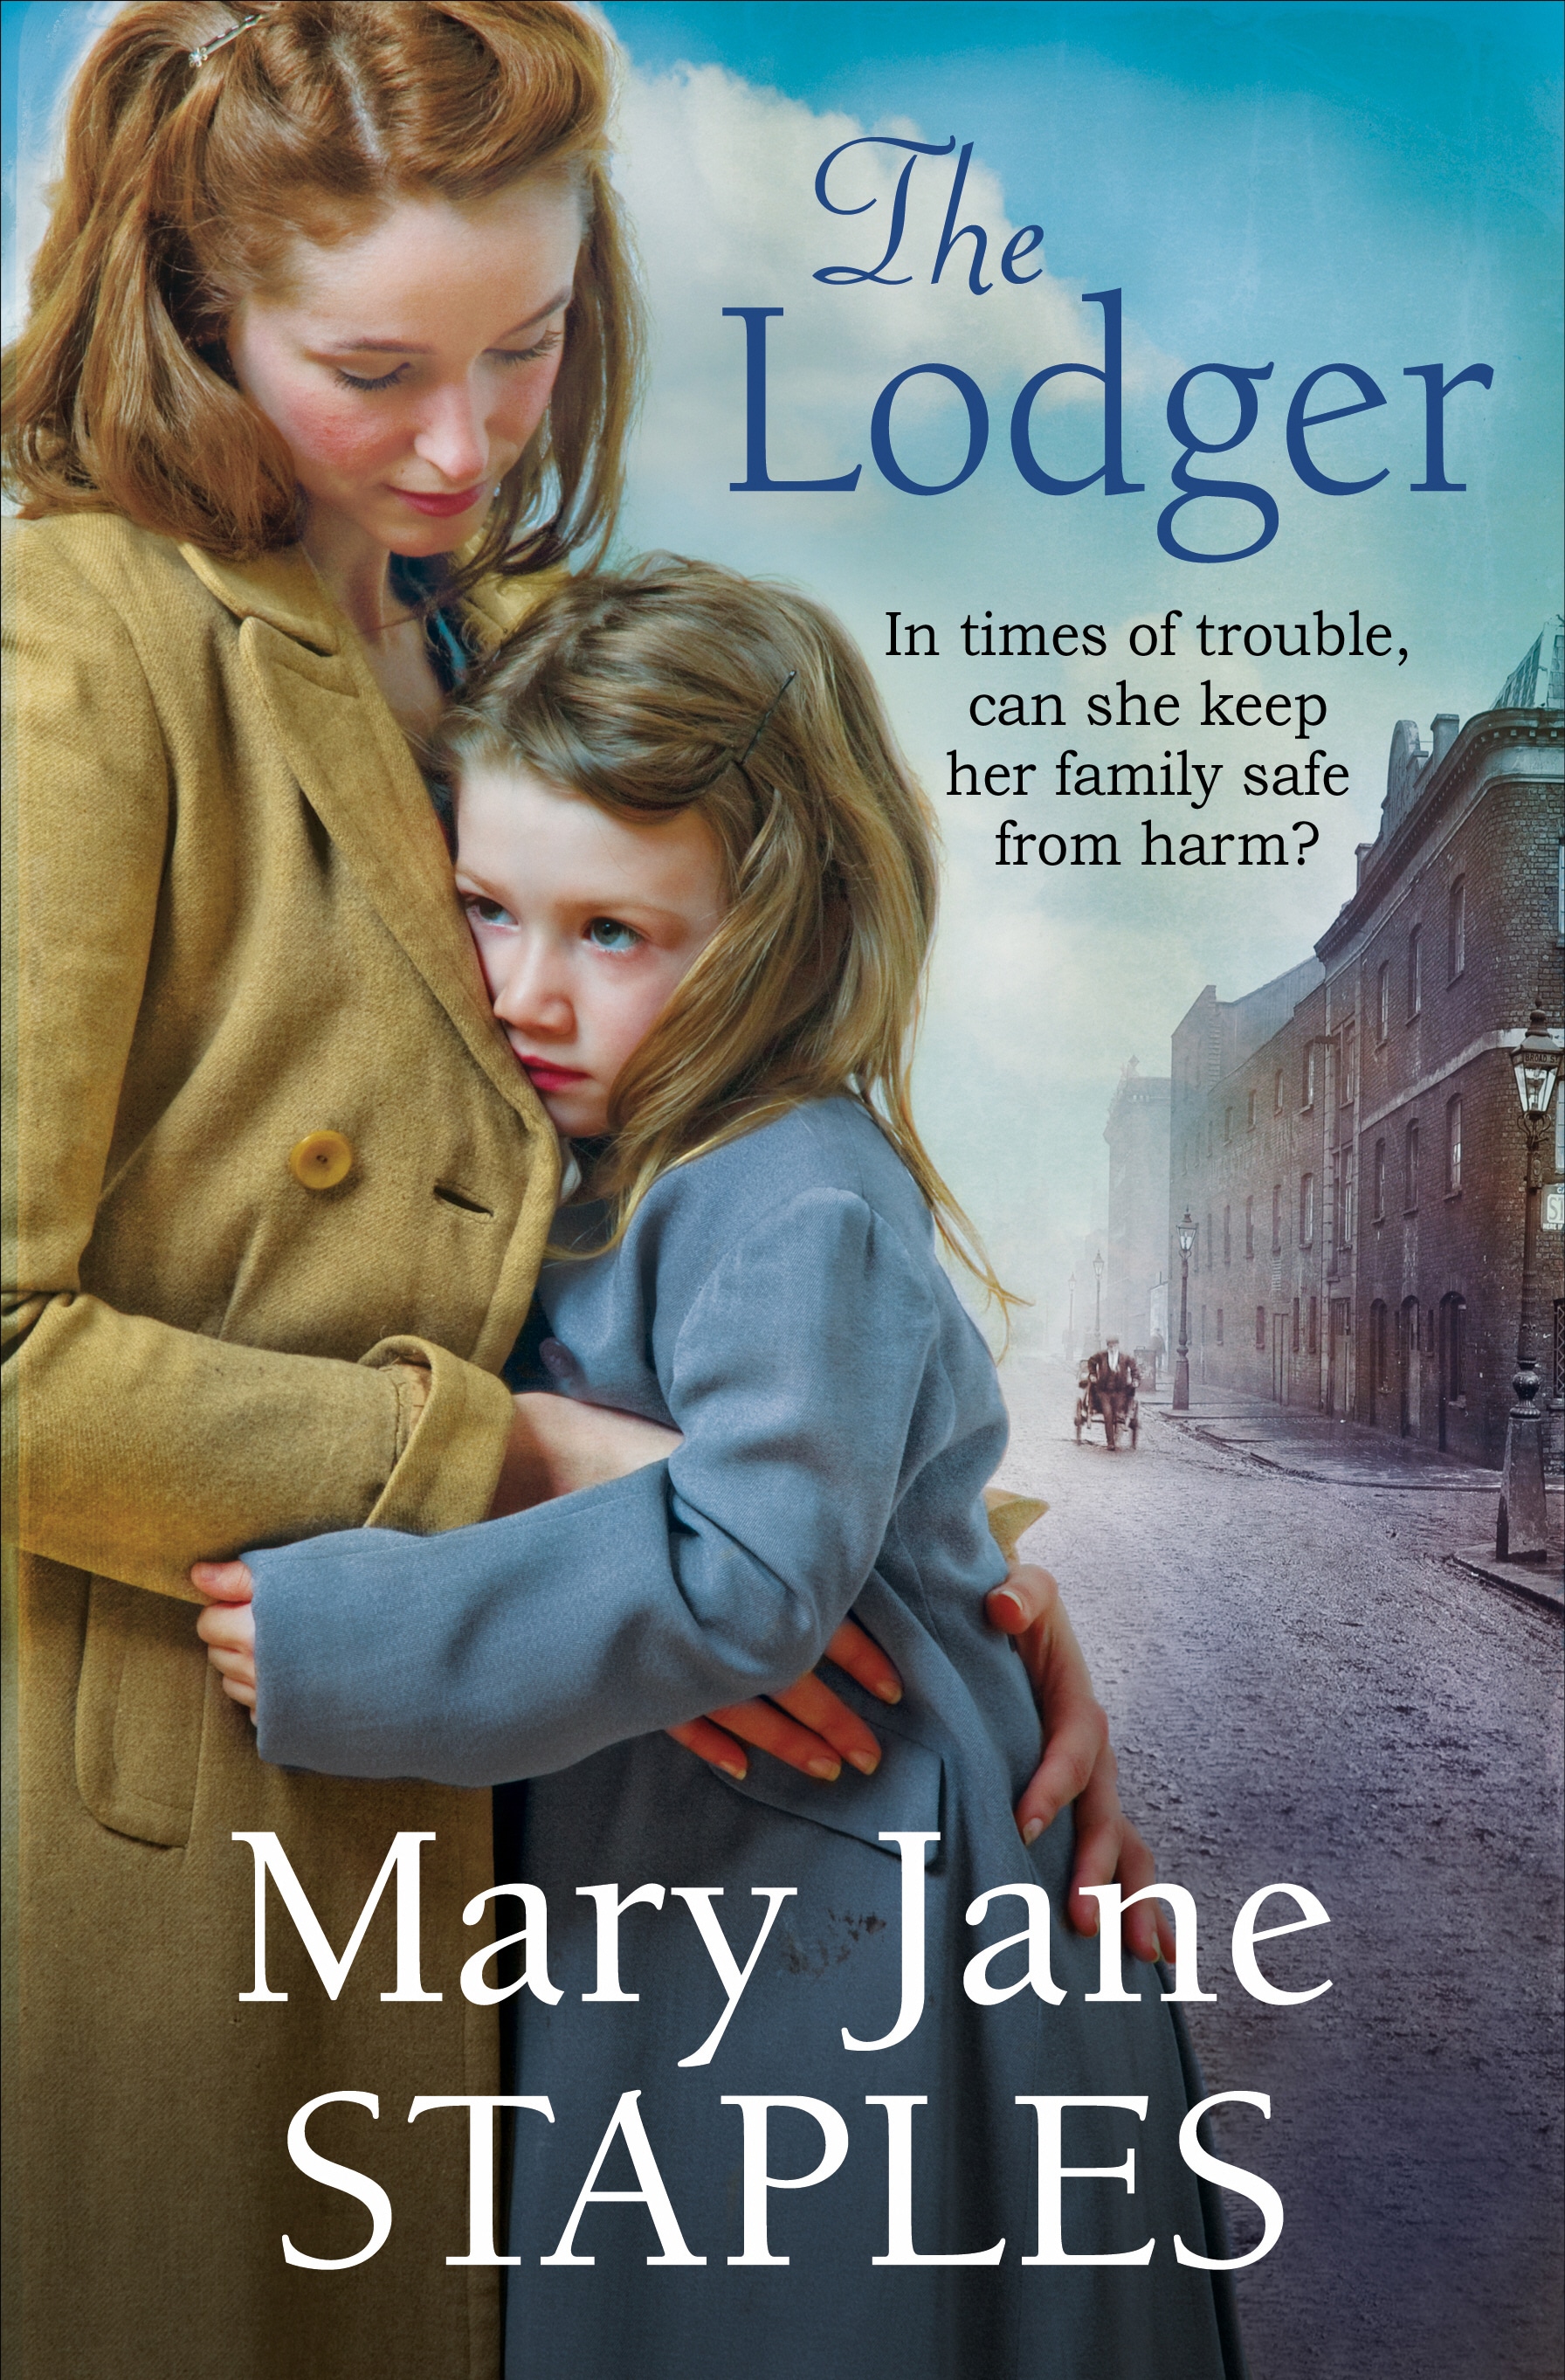 Book “The Lodger” by Mary Jane Staples — February 20, 2020